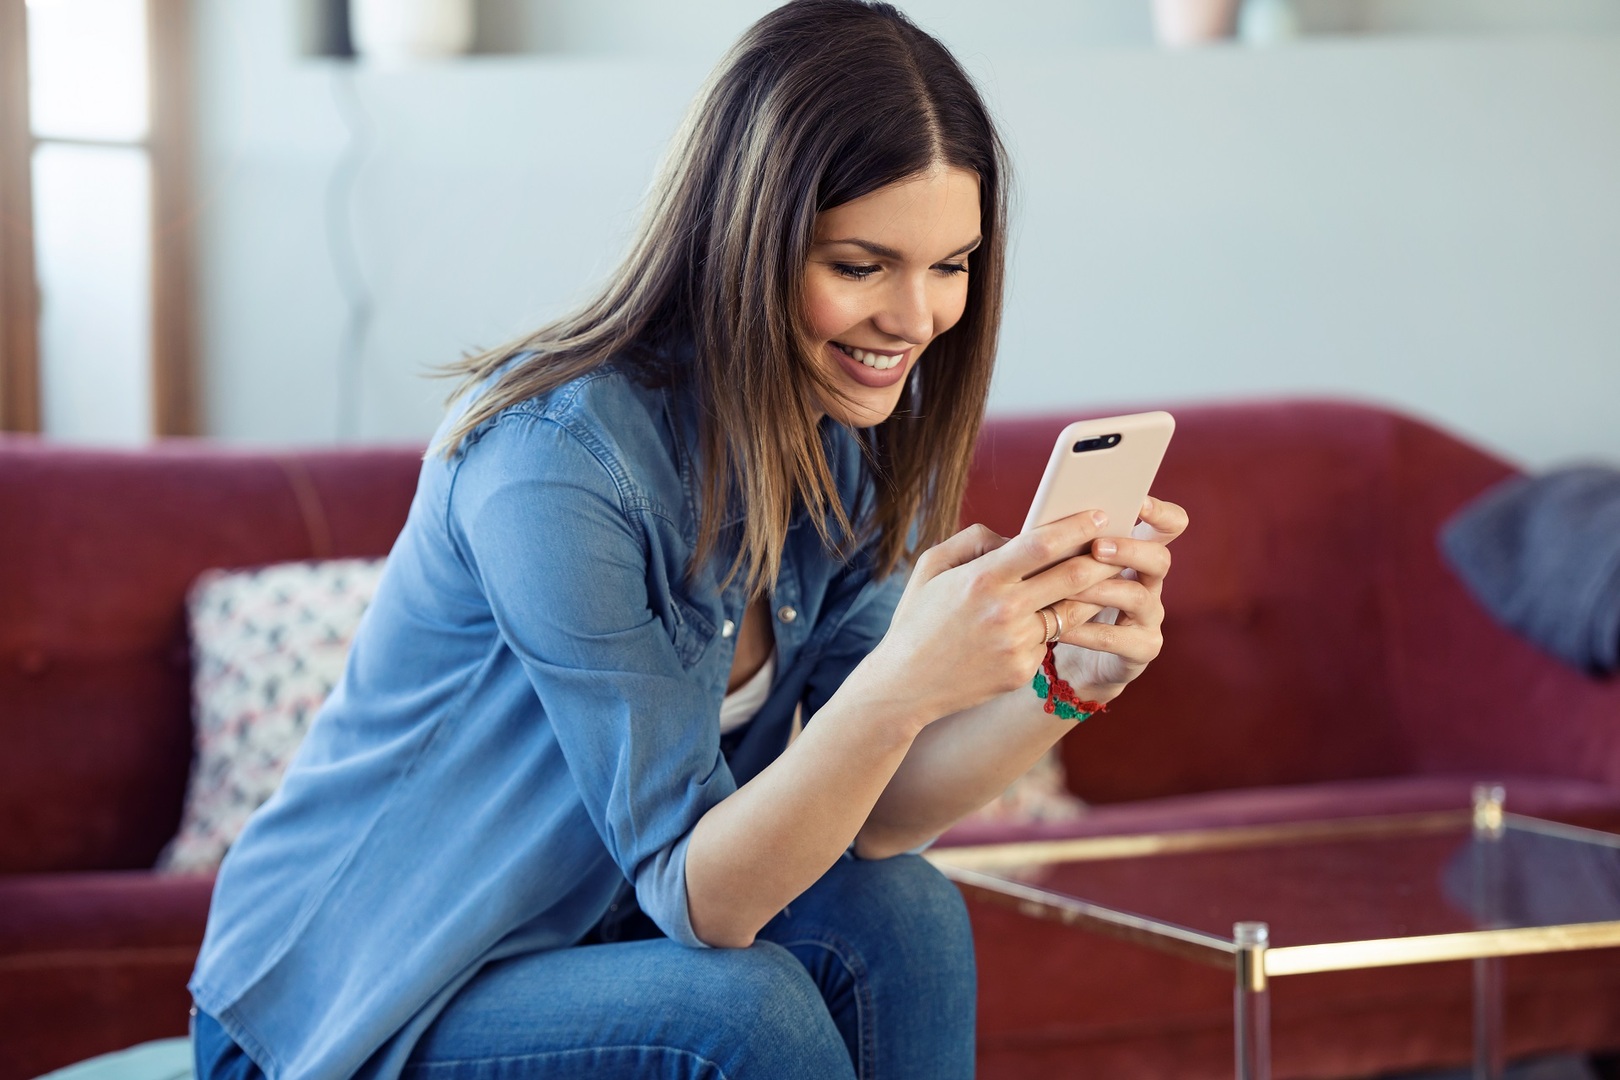 Pretty young woman using her mobile phone while sitting on sofa